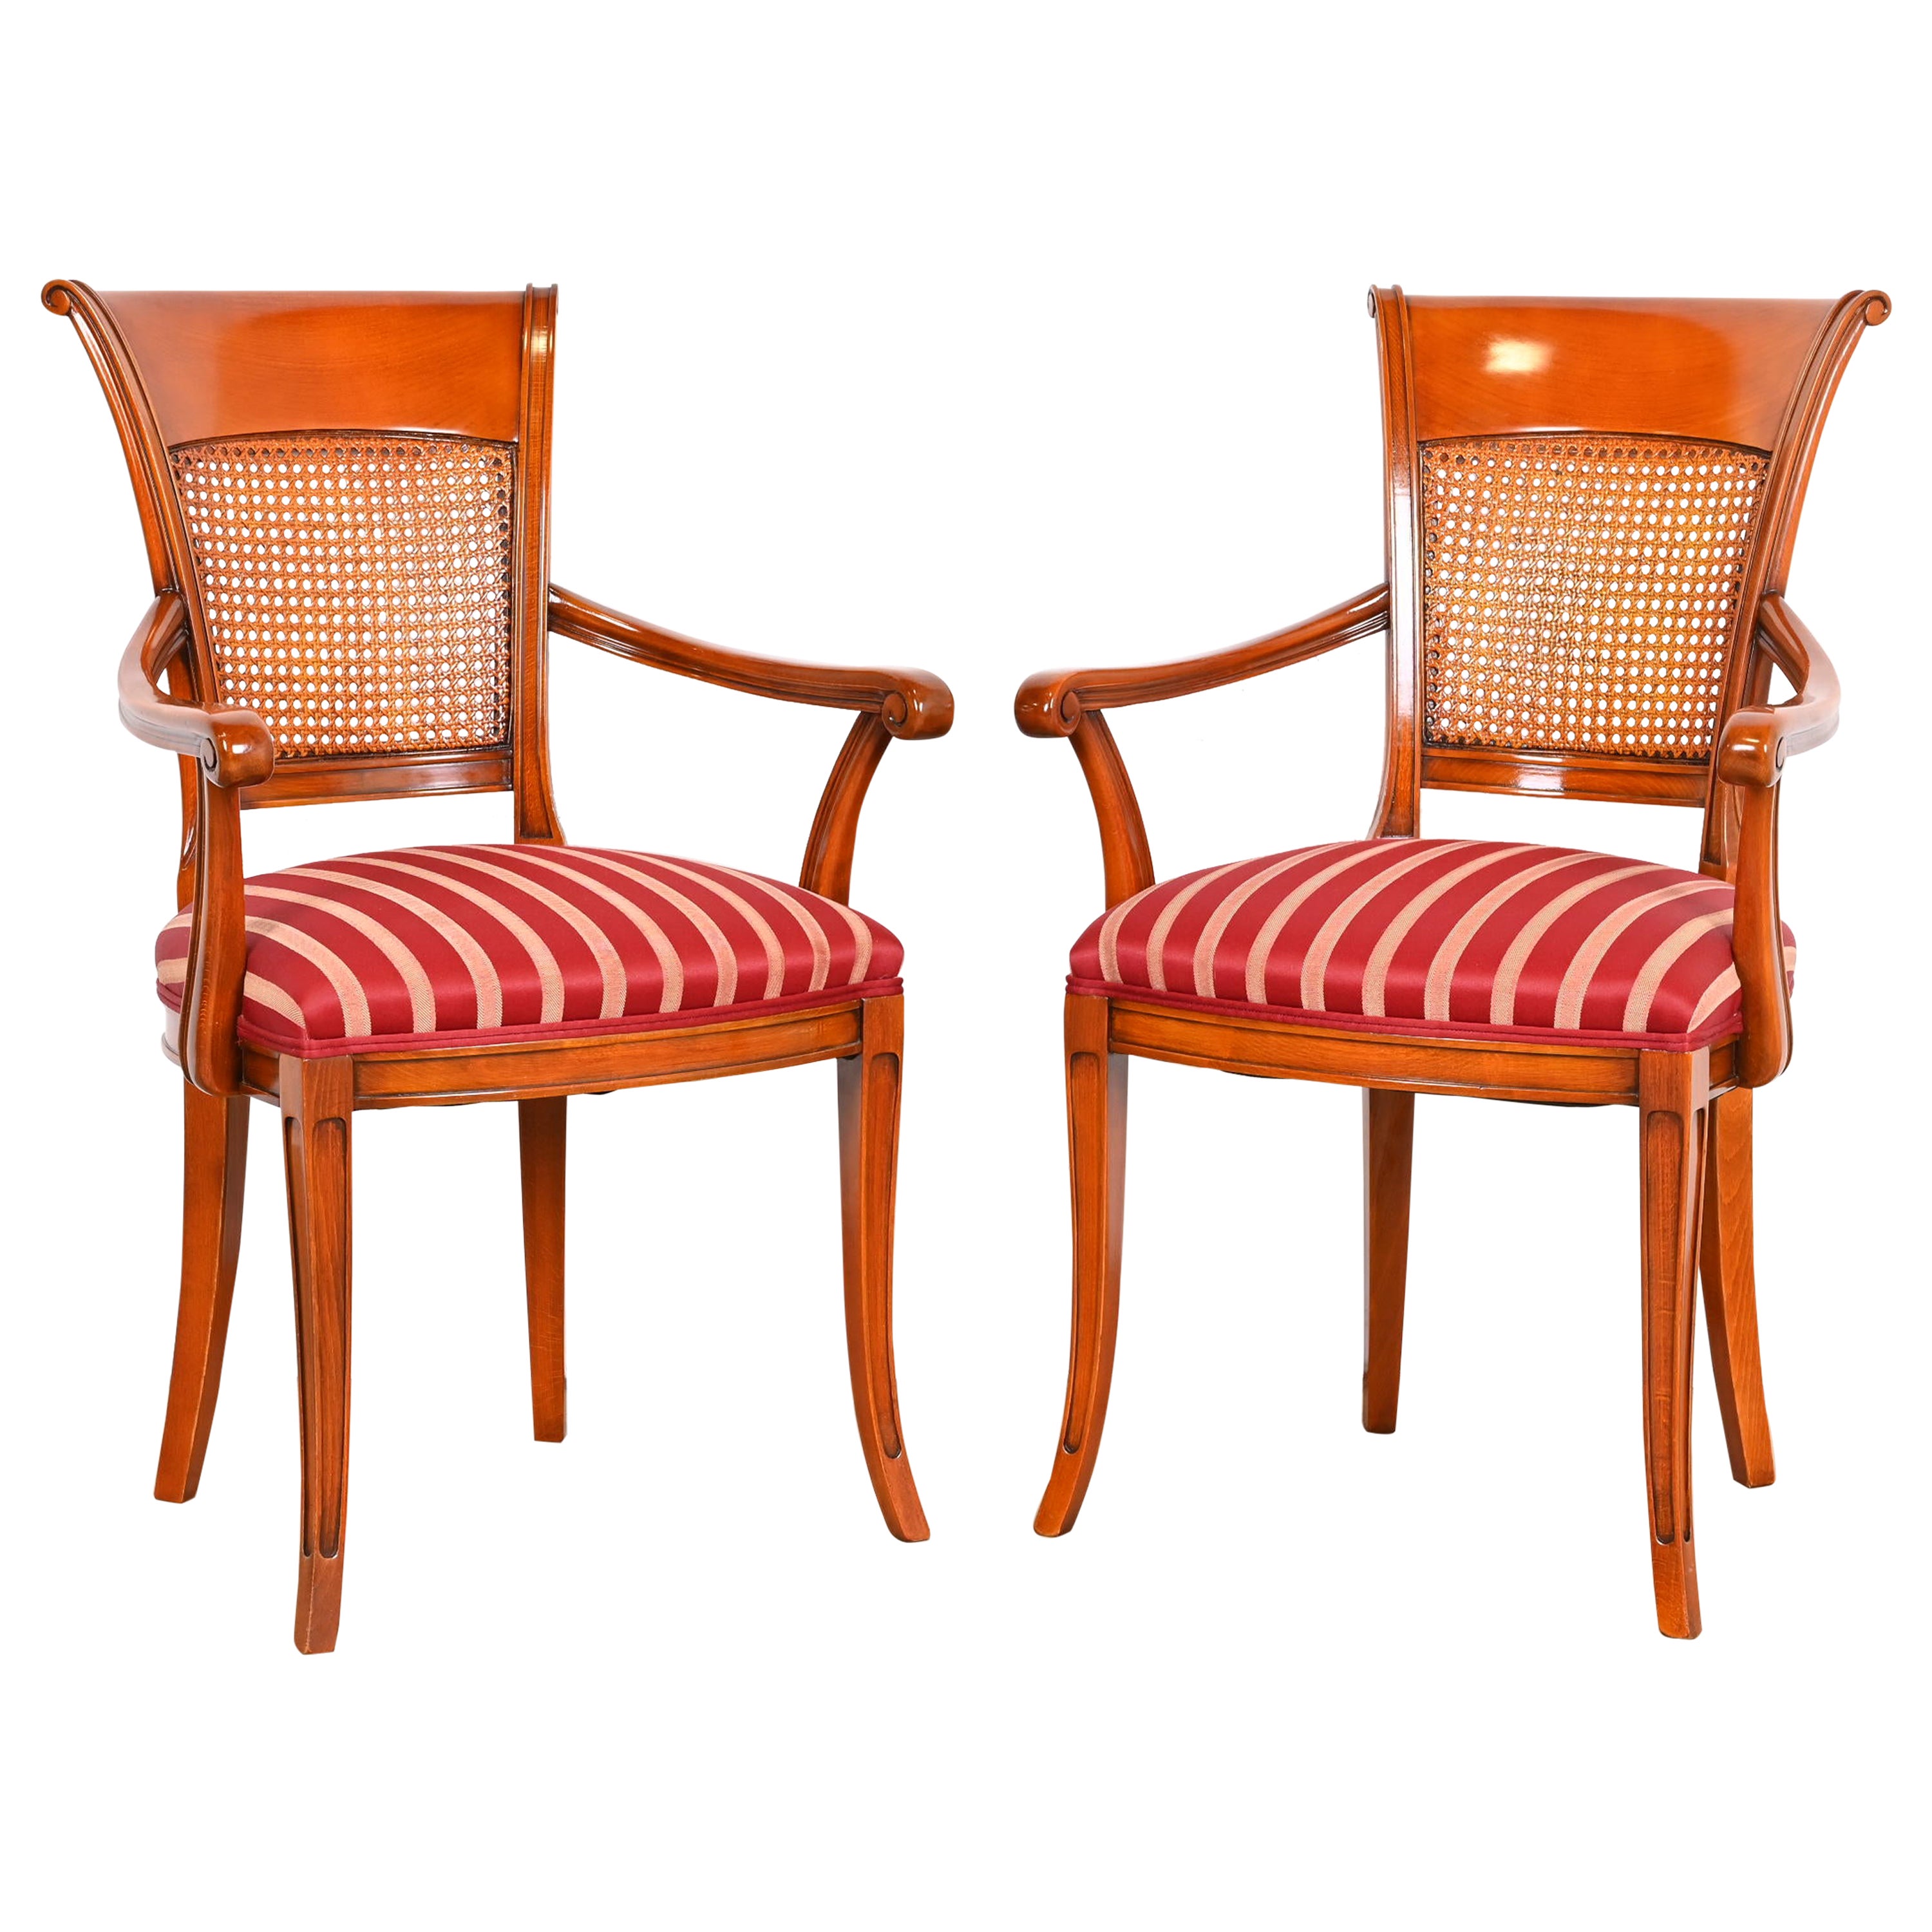 Italian Neoclassical Fruitwood Cane Back Armchairs, Pair